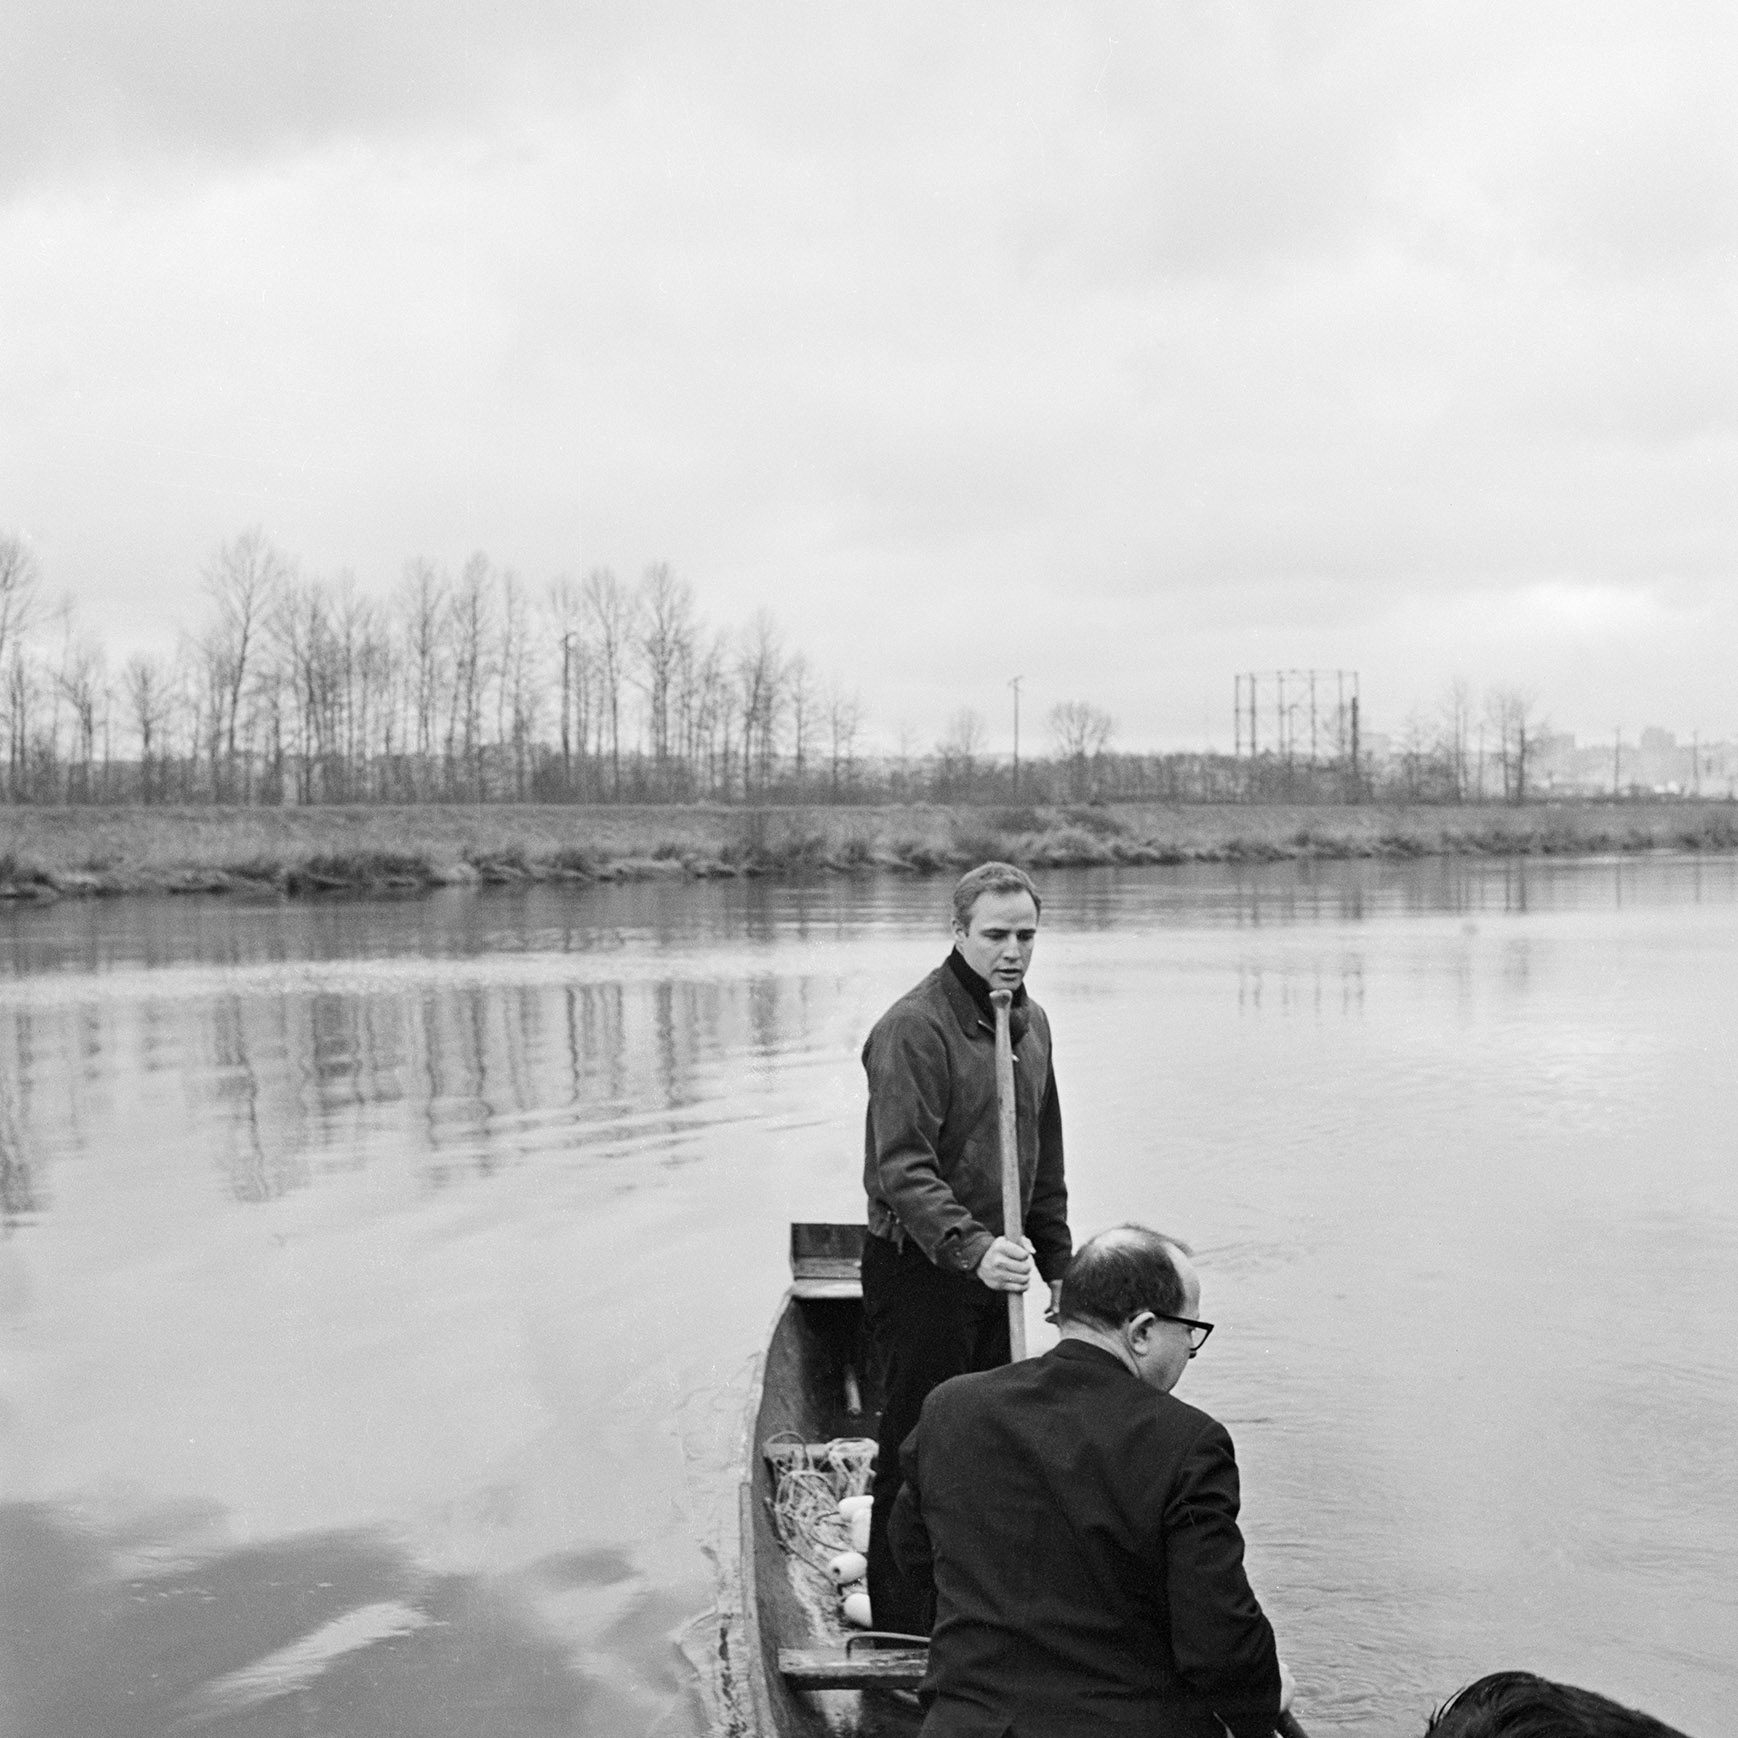 Marlon Brando pushes away from shore in a barge along the Puyallup River.